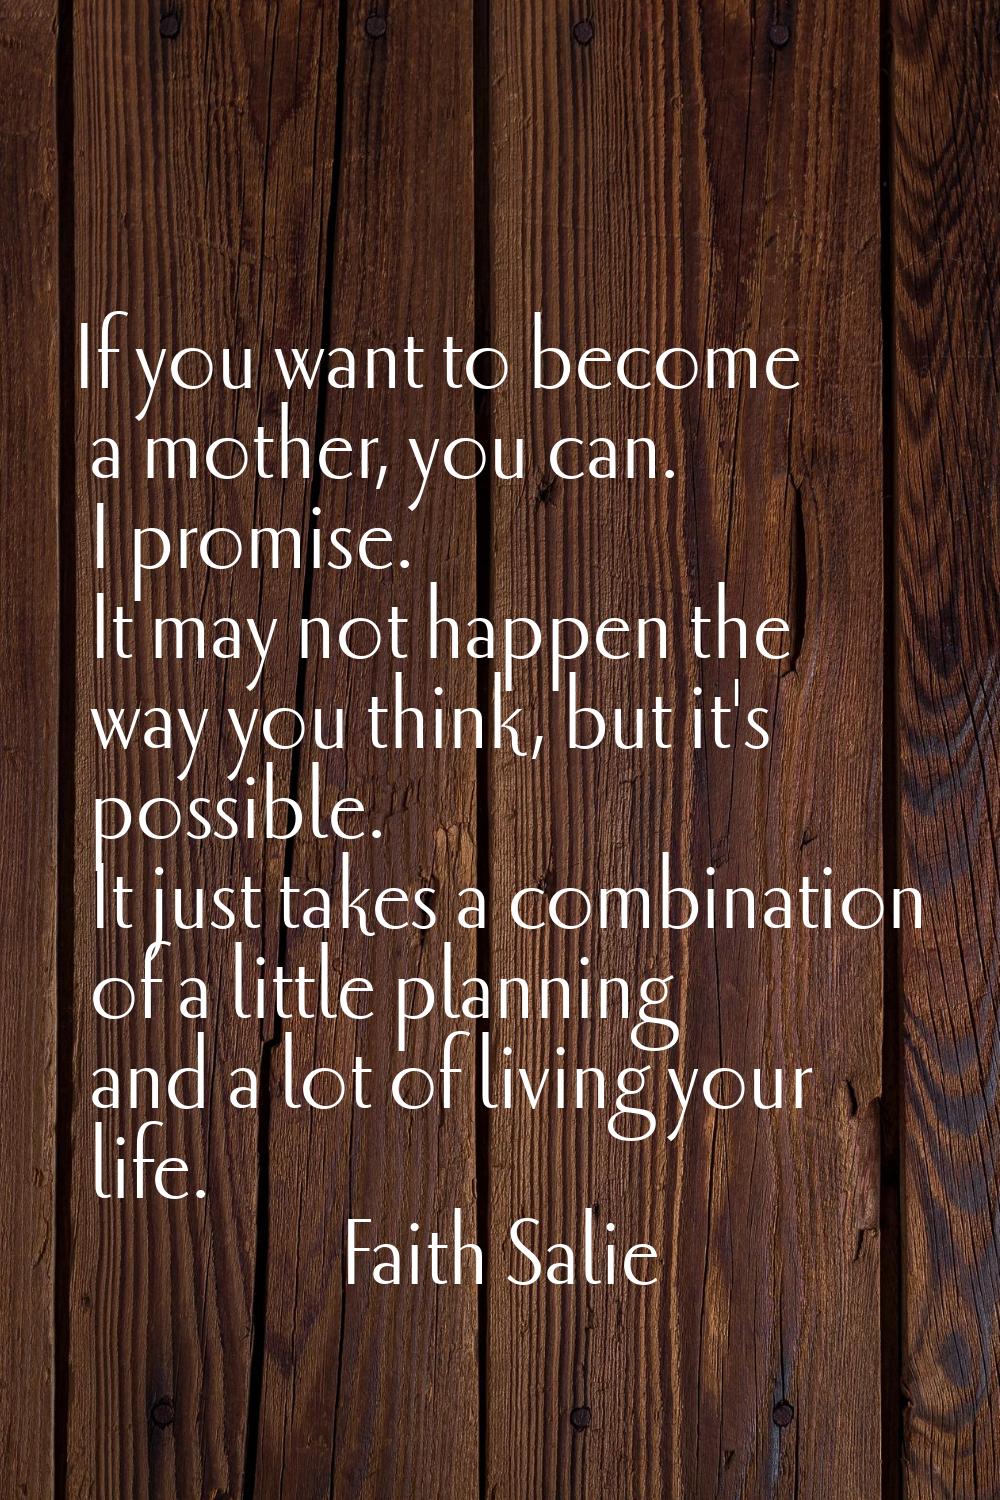 If you want to become a mother, you can. I promise. It may not happen the way you think, but it's p